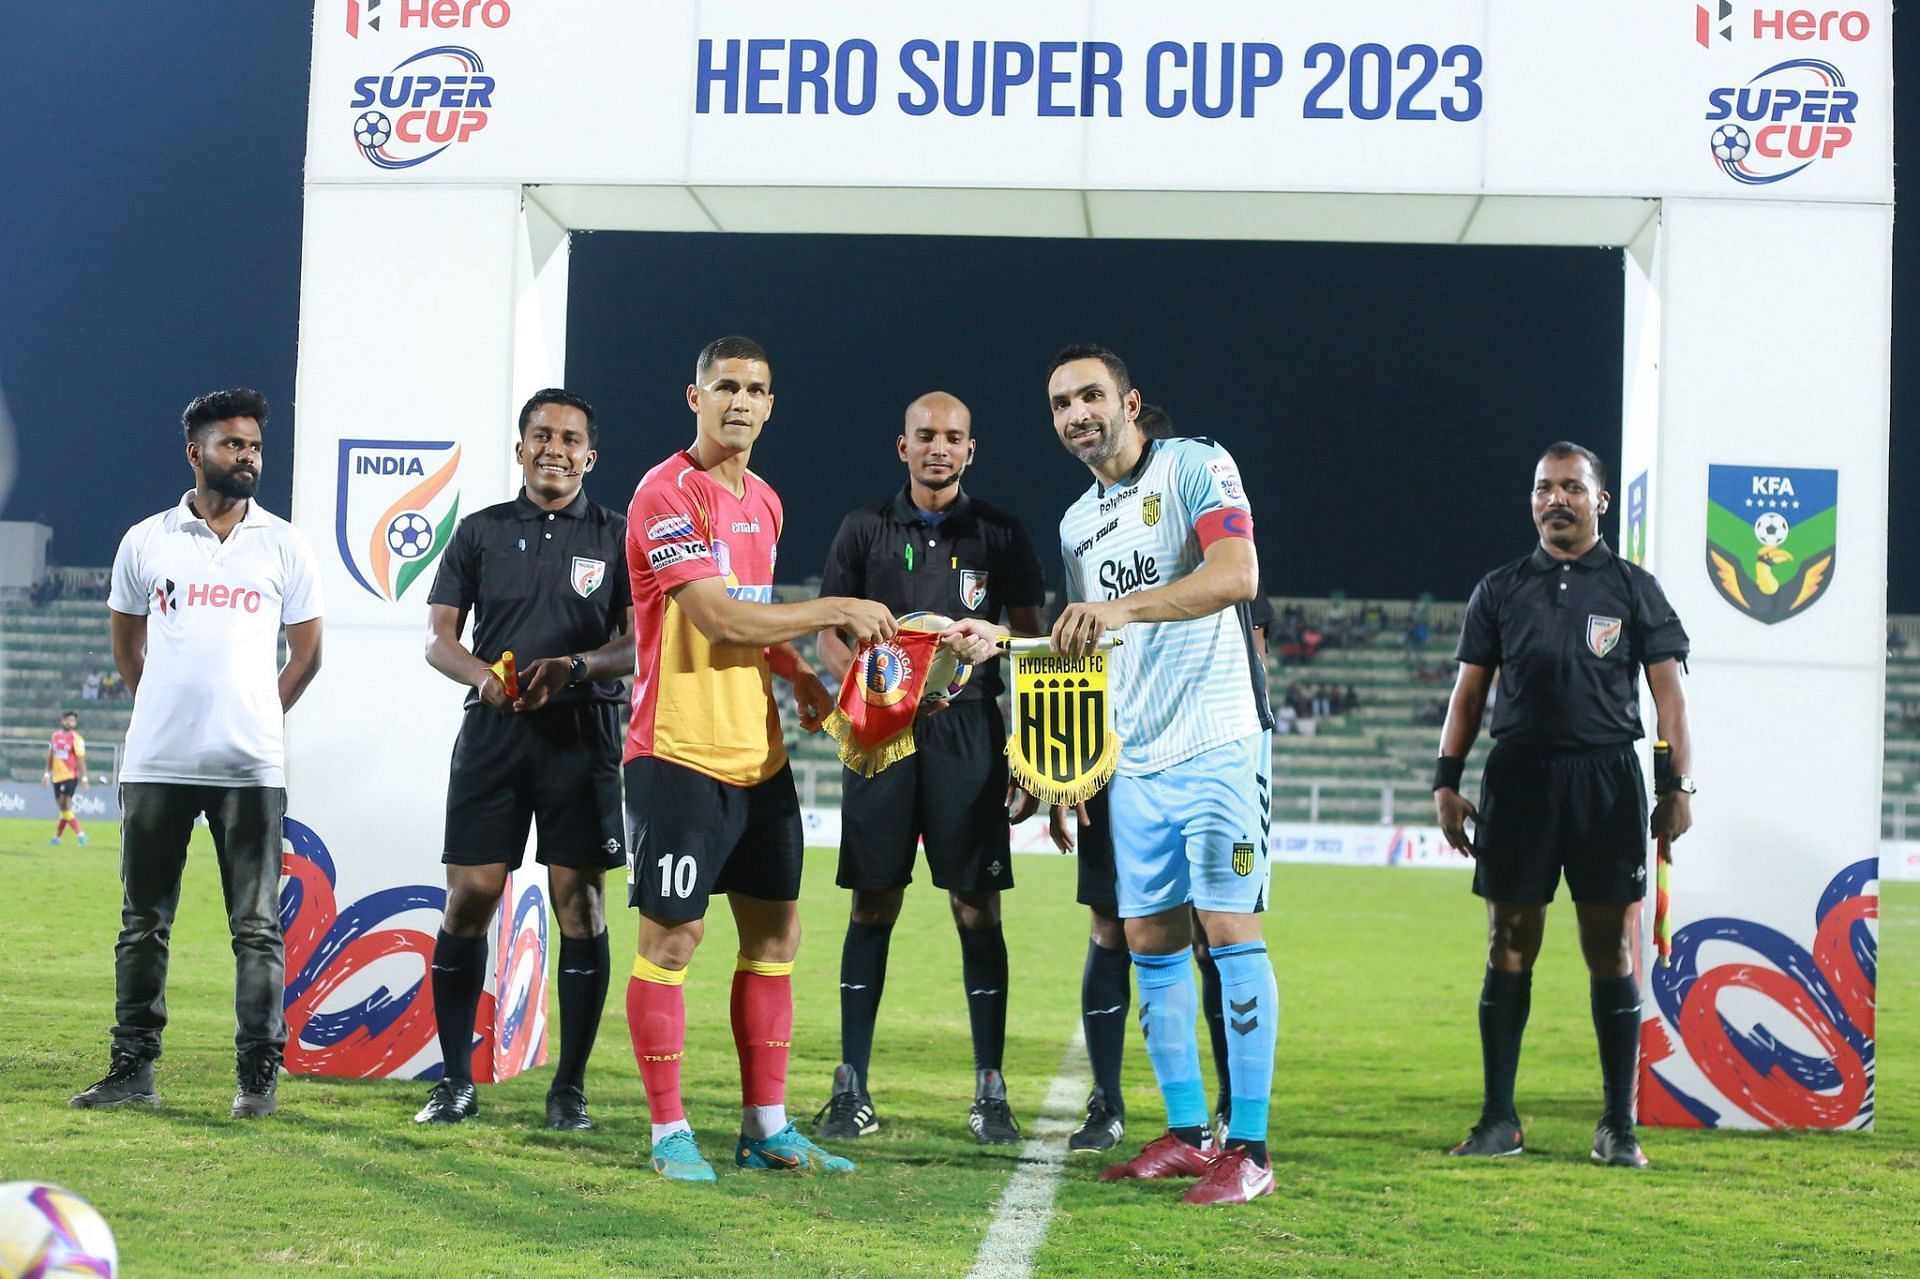 East Bengal and Hyderabad FC played out a thrilling 3-3 draw in the Hero Super Cup 2023. [Credits: Twitter]